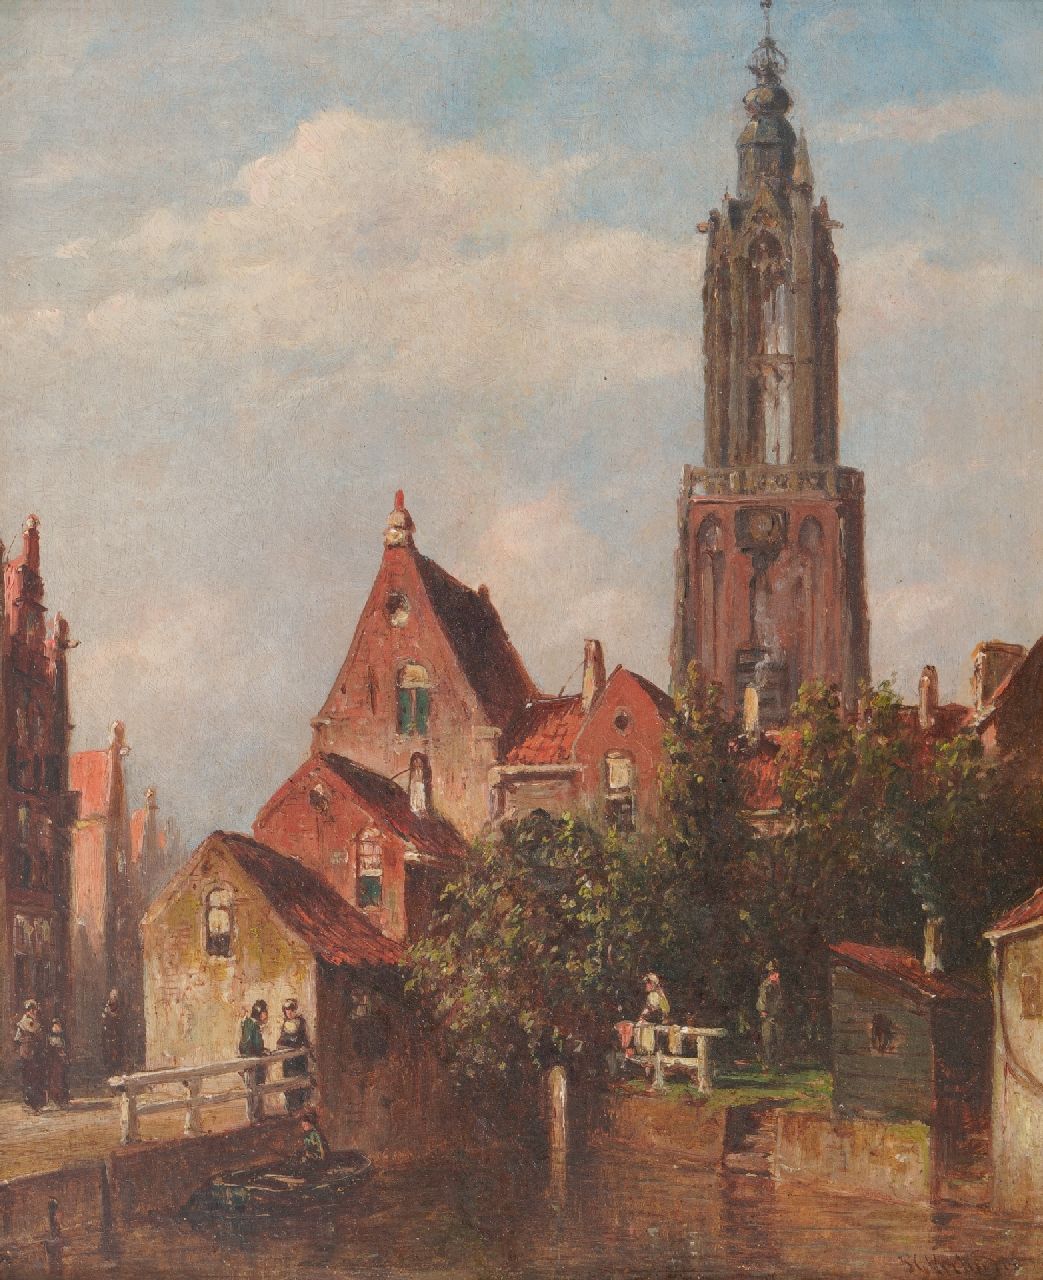 Vertin P.G.  | Petrus Gerardus Vertin | Paintings offered for sale | A town view with the 'Onze Lieve Vrouwe tower' in Amersfoort, oil on panel 24.0 x 19.8 cm, signed l.r.